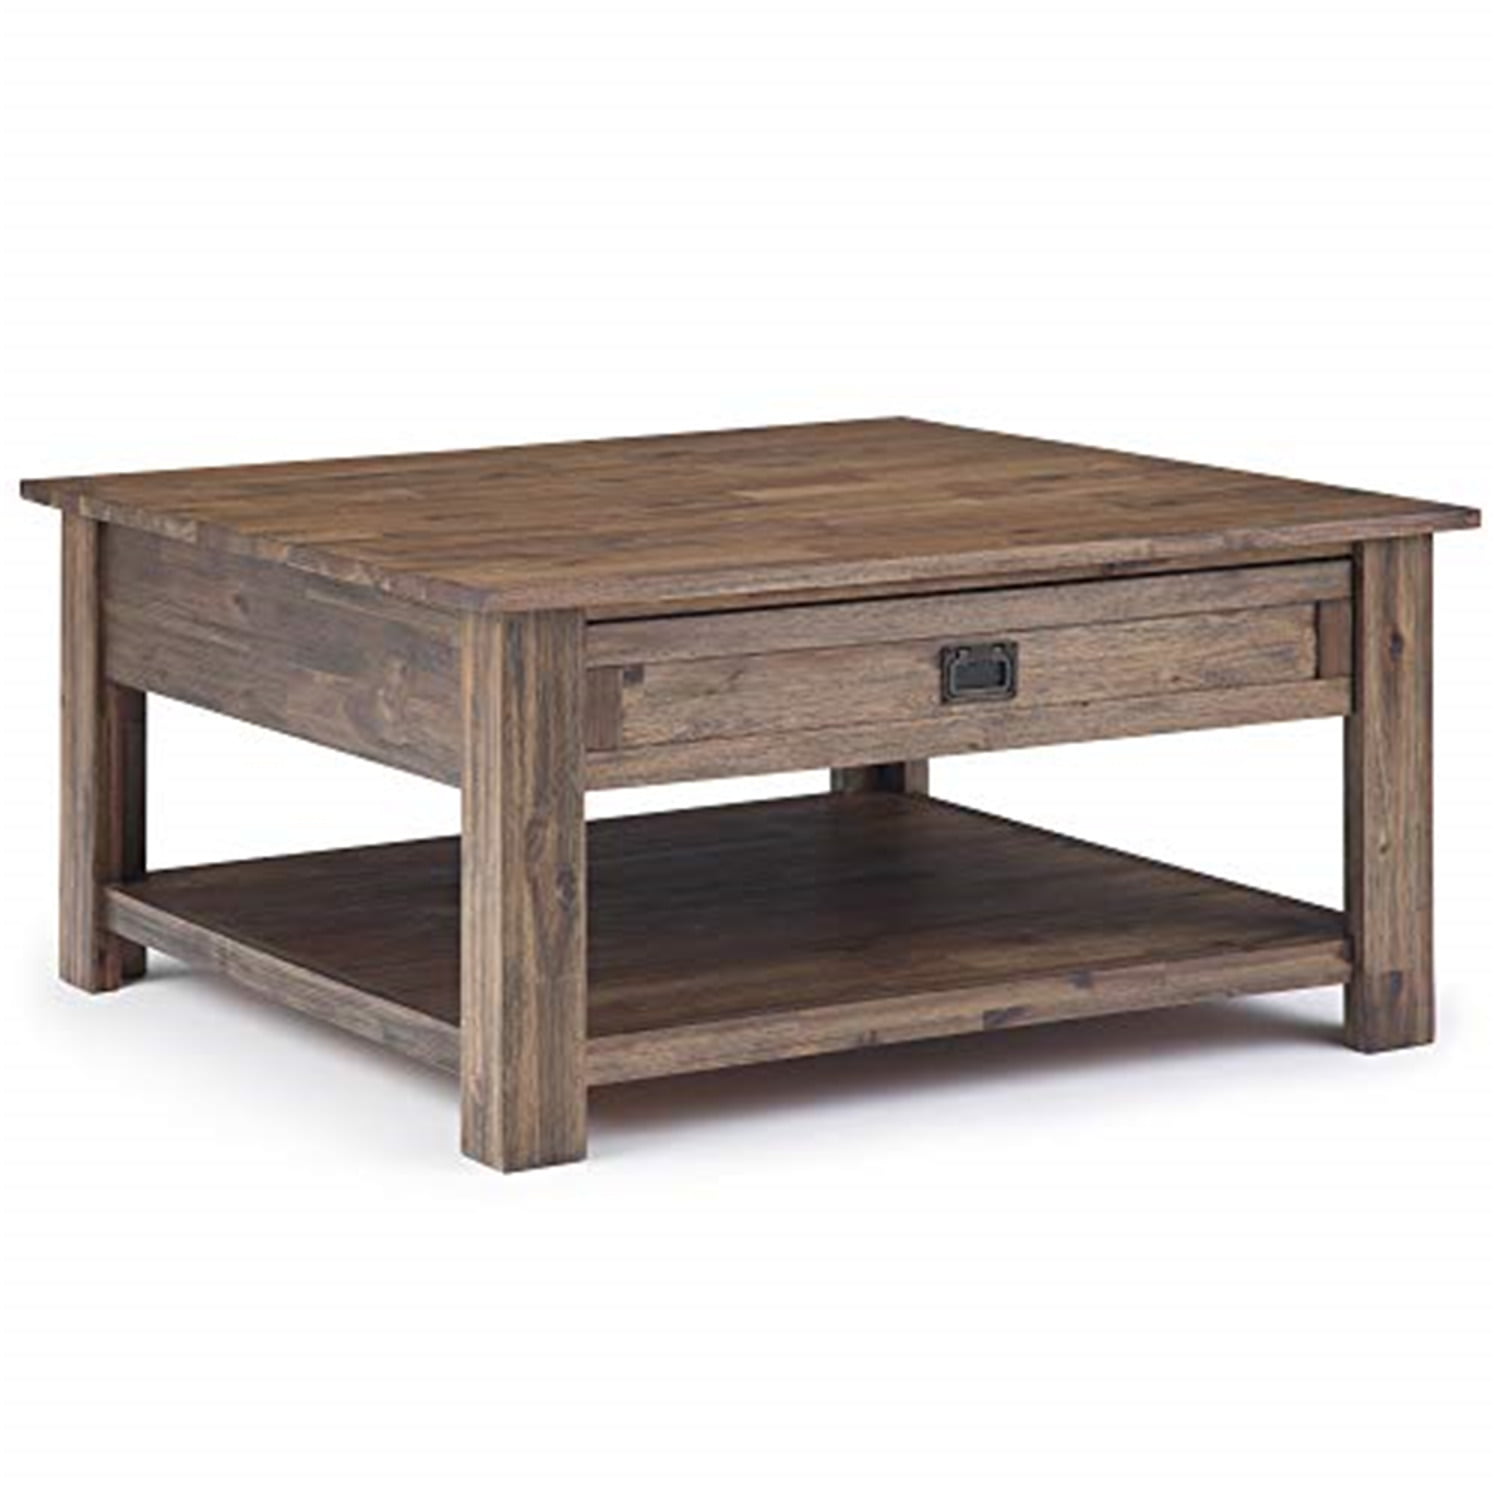 38 Inch Wide Square Rustic Coffee Table, Large Square Side Table With Storage